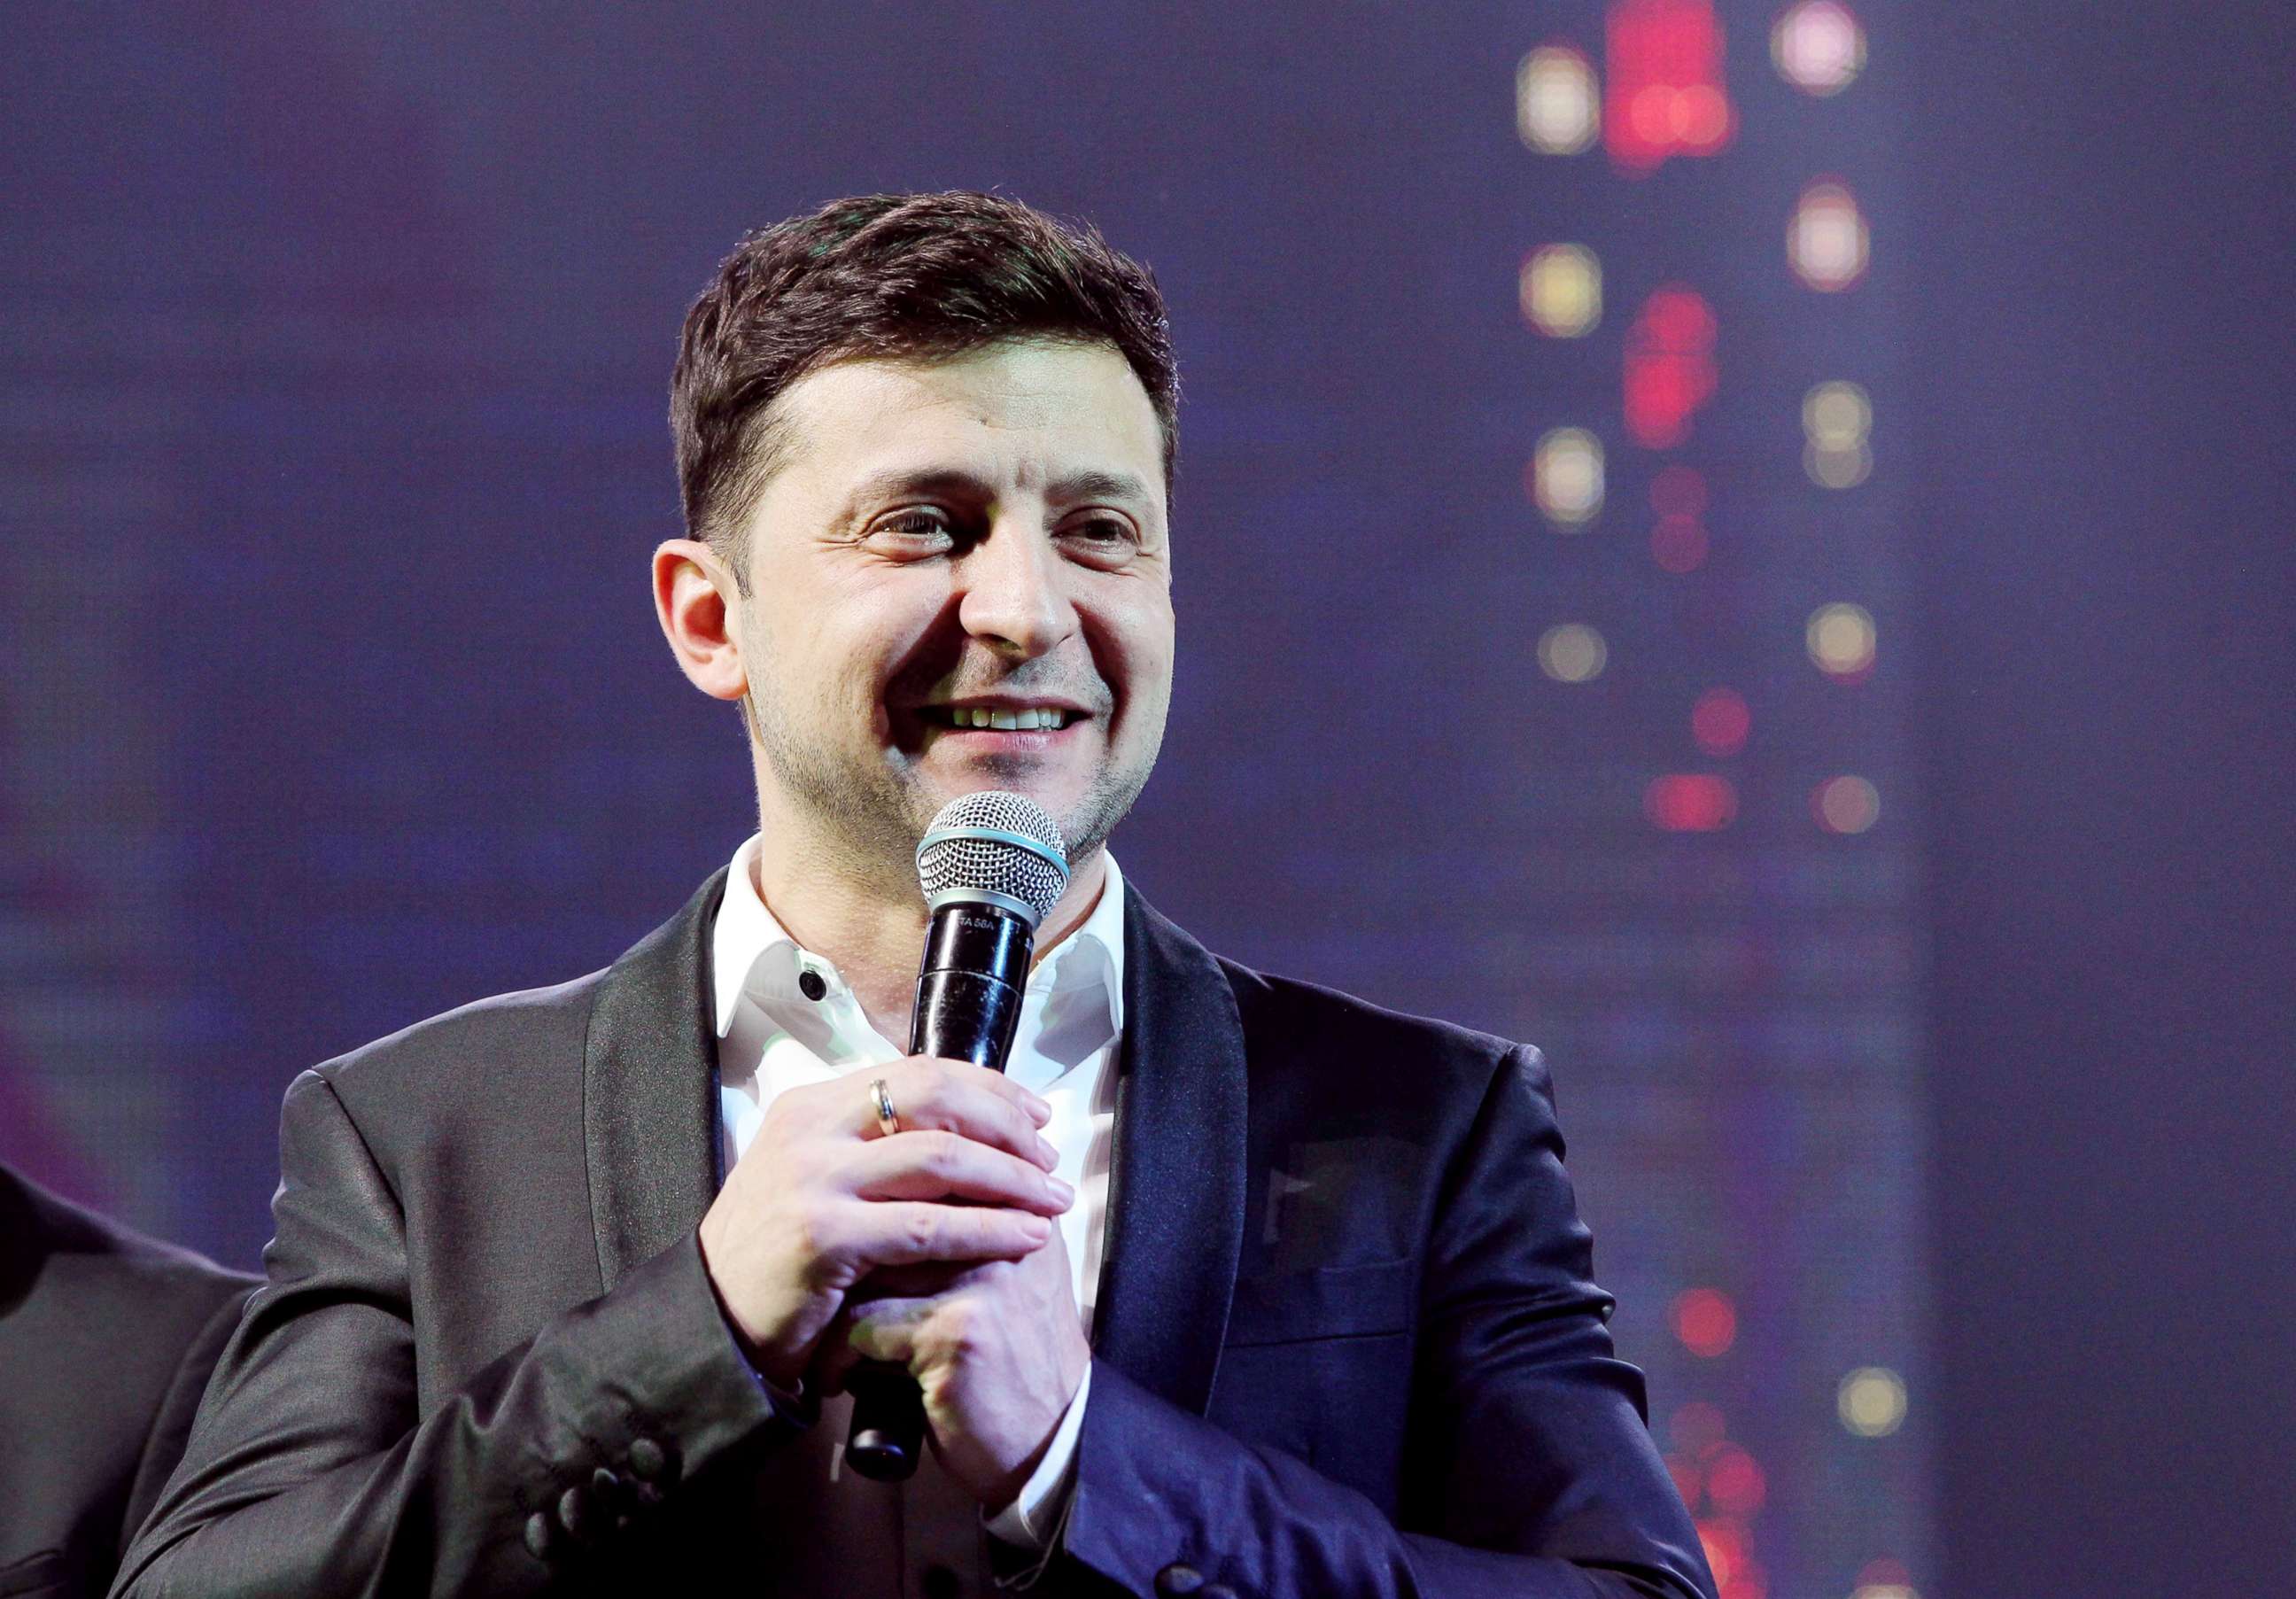 PHOTO: Volodymyr Zelenskiy performs during a comedy show at a concert hall in the Brovary city near of Kiev, Ukraine, March, 29, 2019.